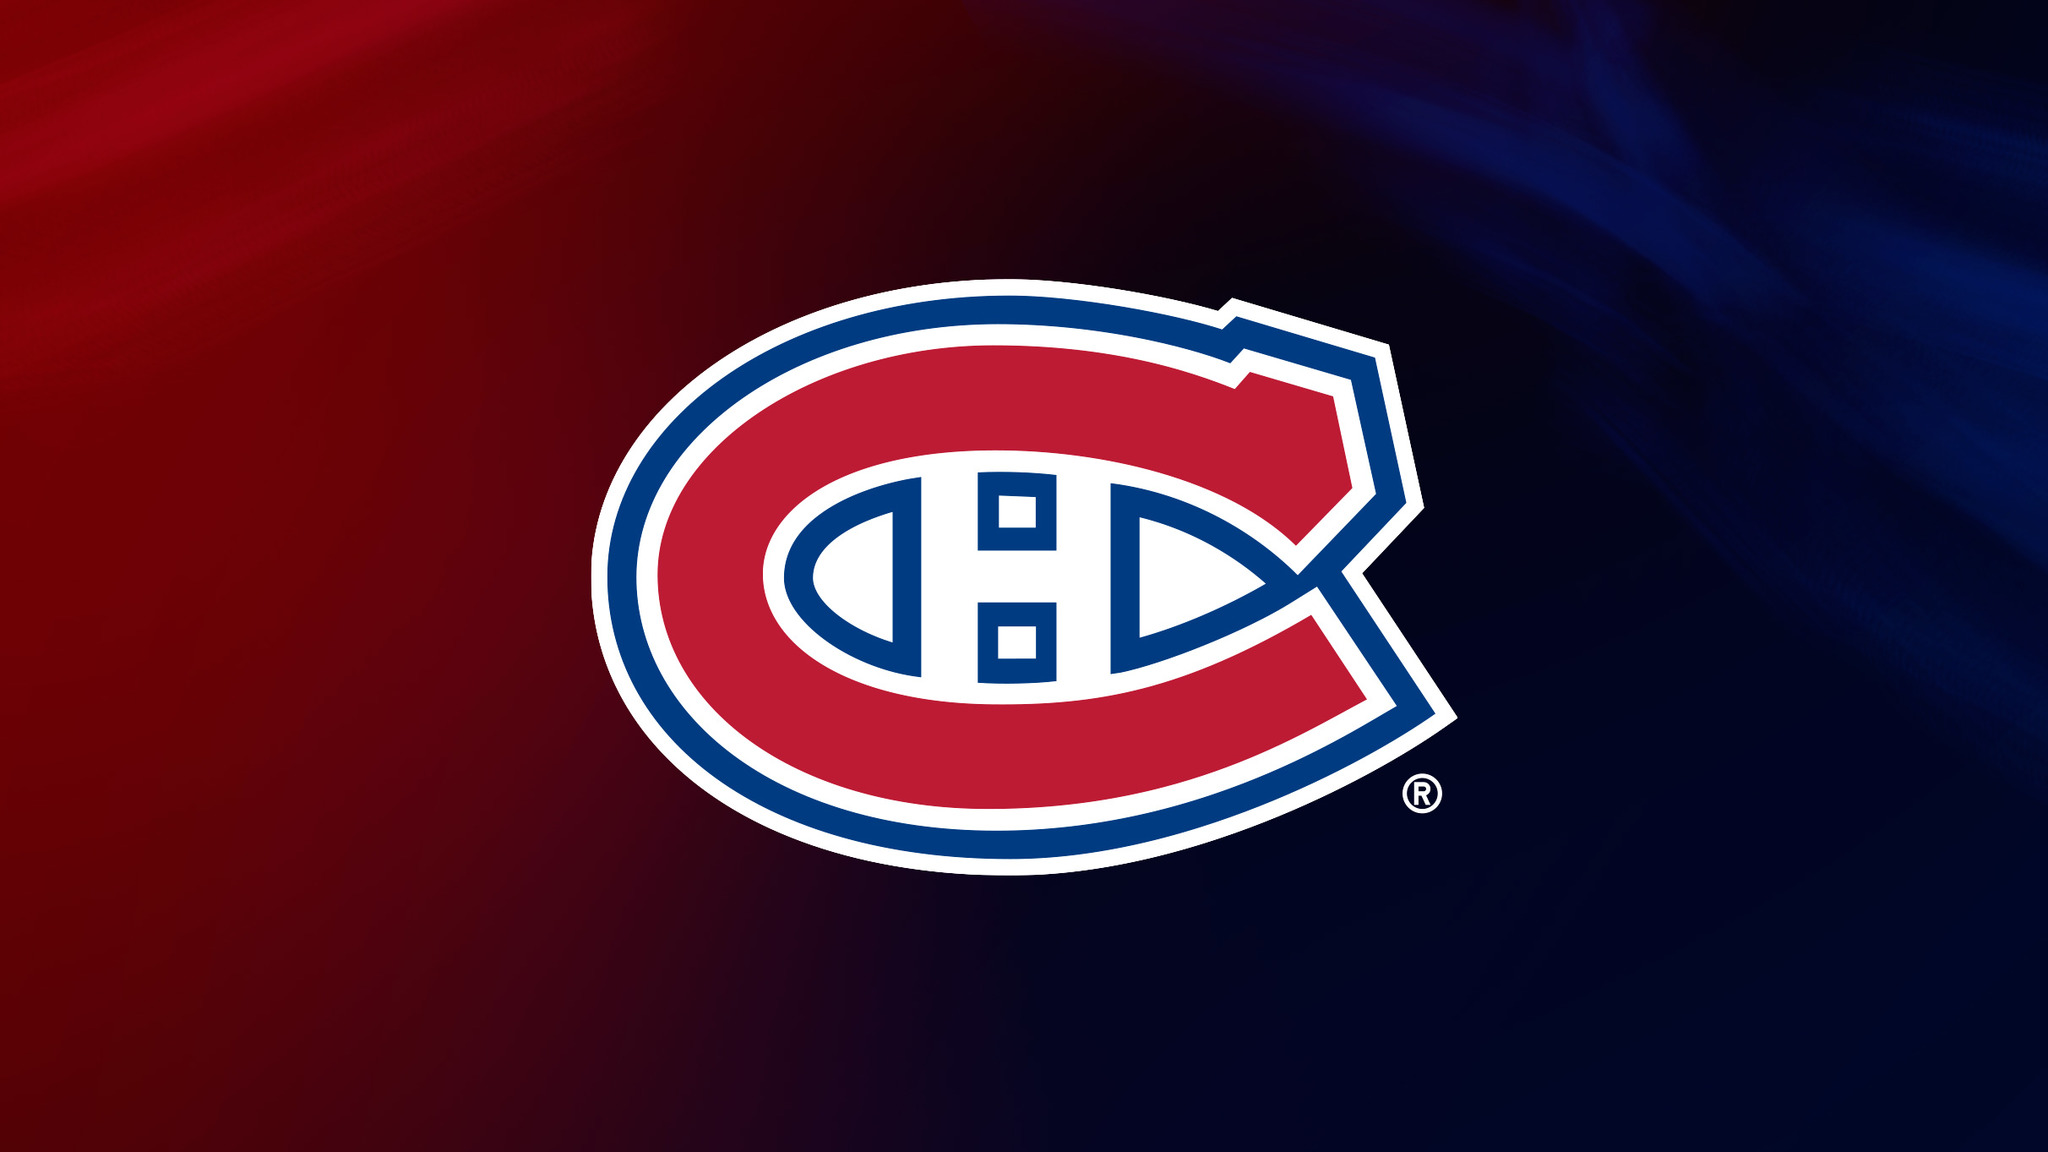 Montreal Canadiens Tickets 2022 2023 NHL Tickets & Schedule